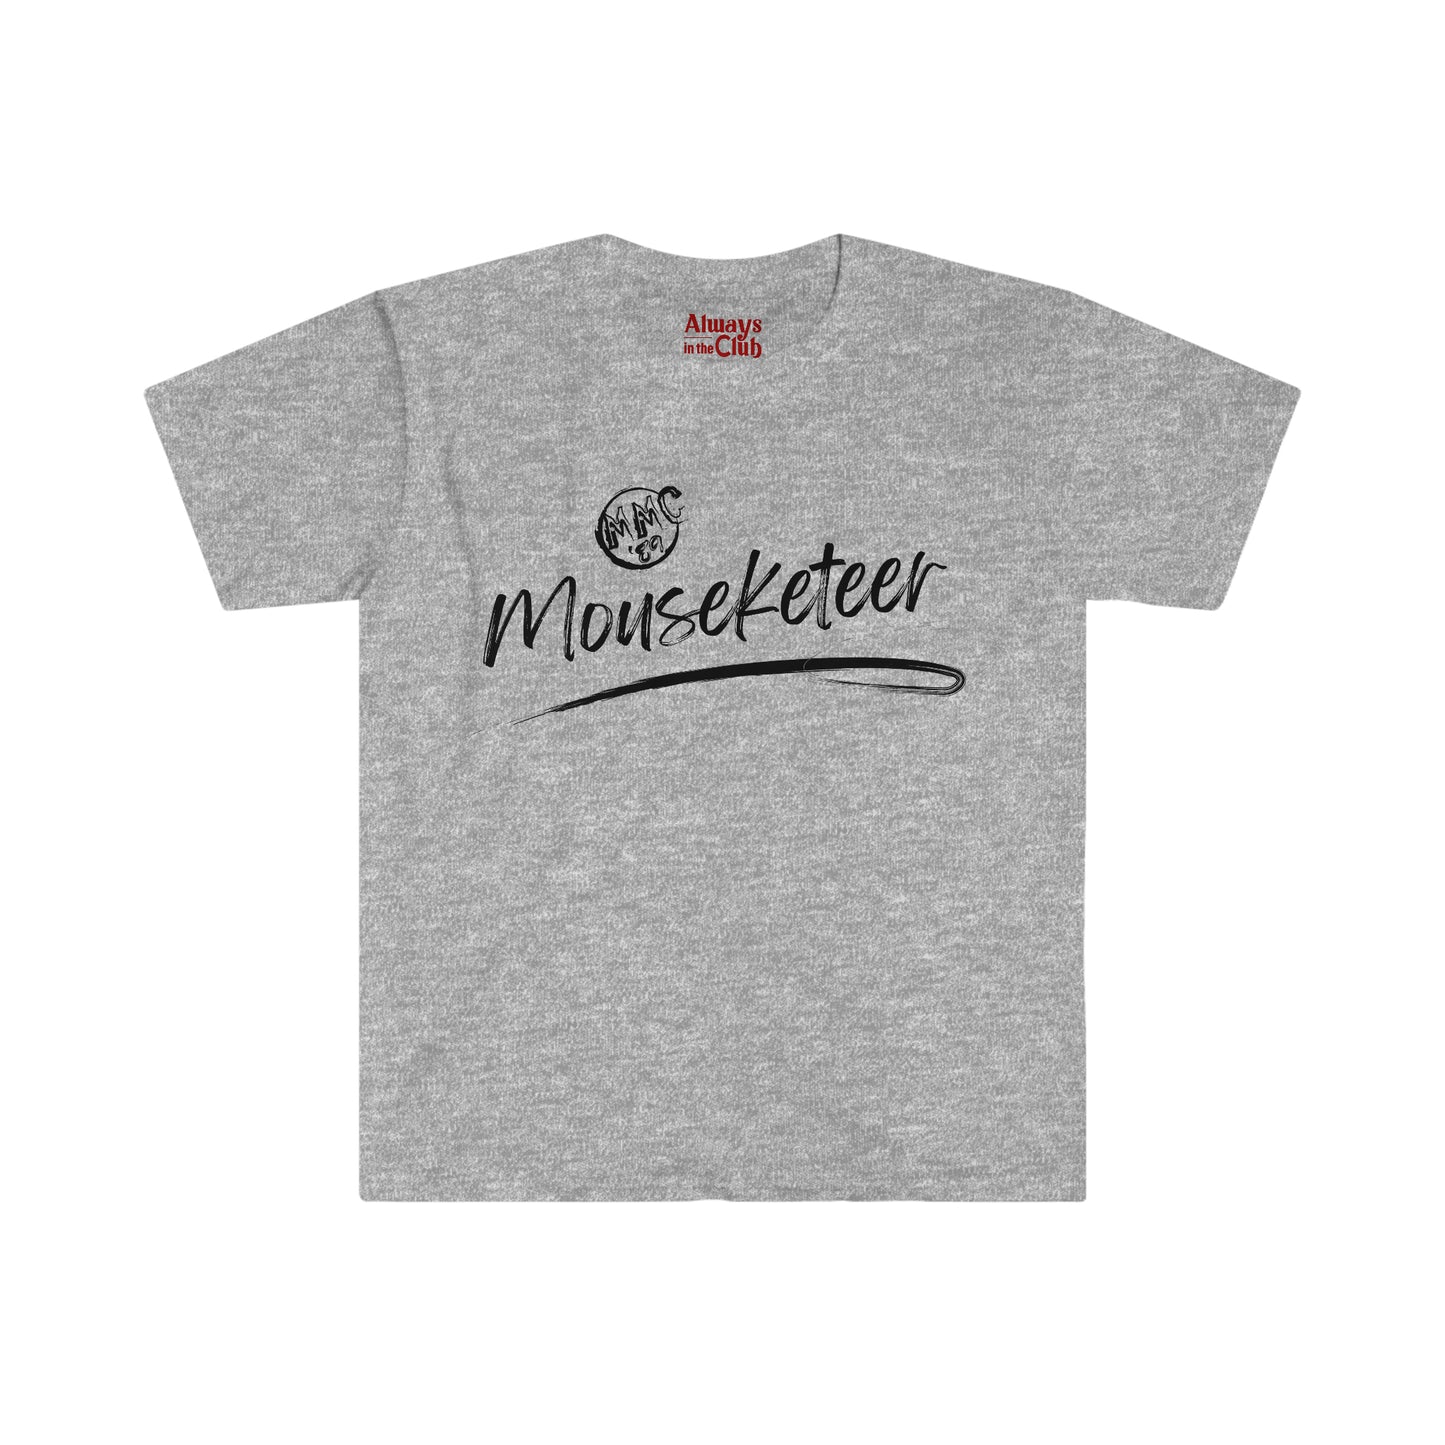 CLUB MEMBER EXCLUSIVE - MMC'89 Mouseketeer Unisex Softstyle T-Shirt